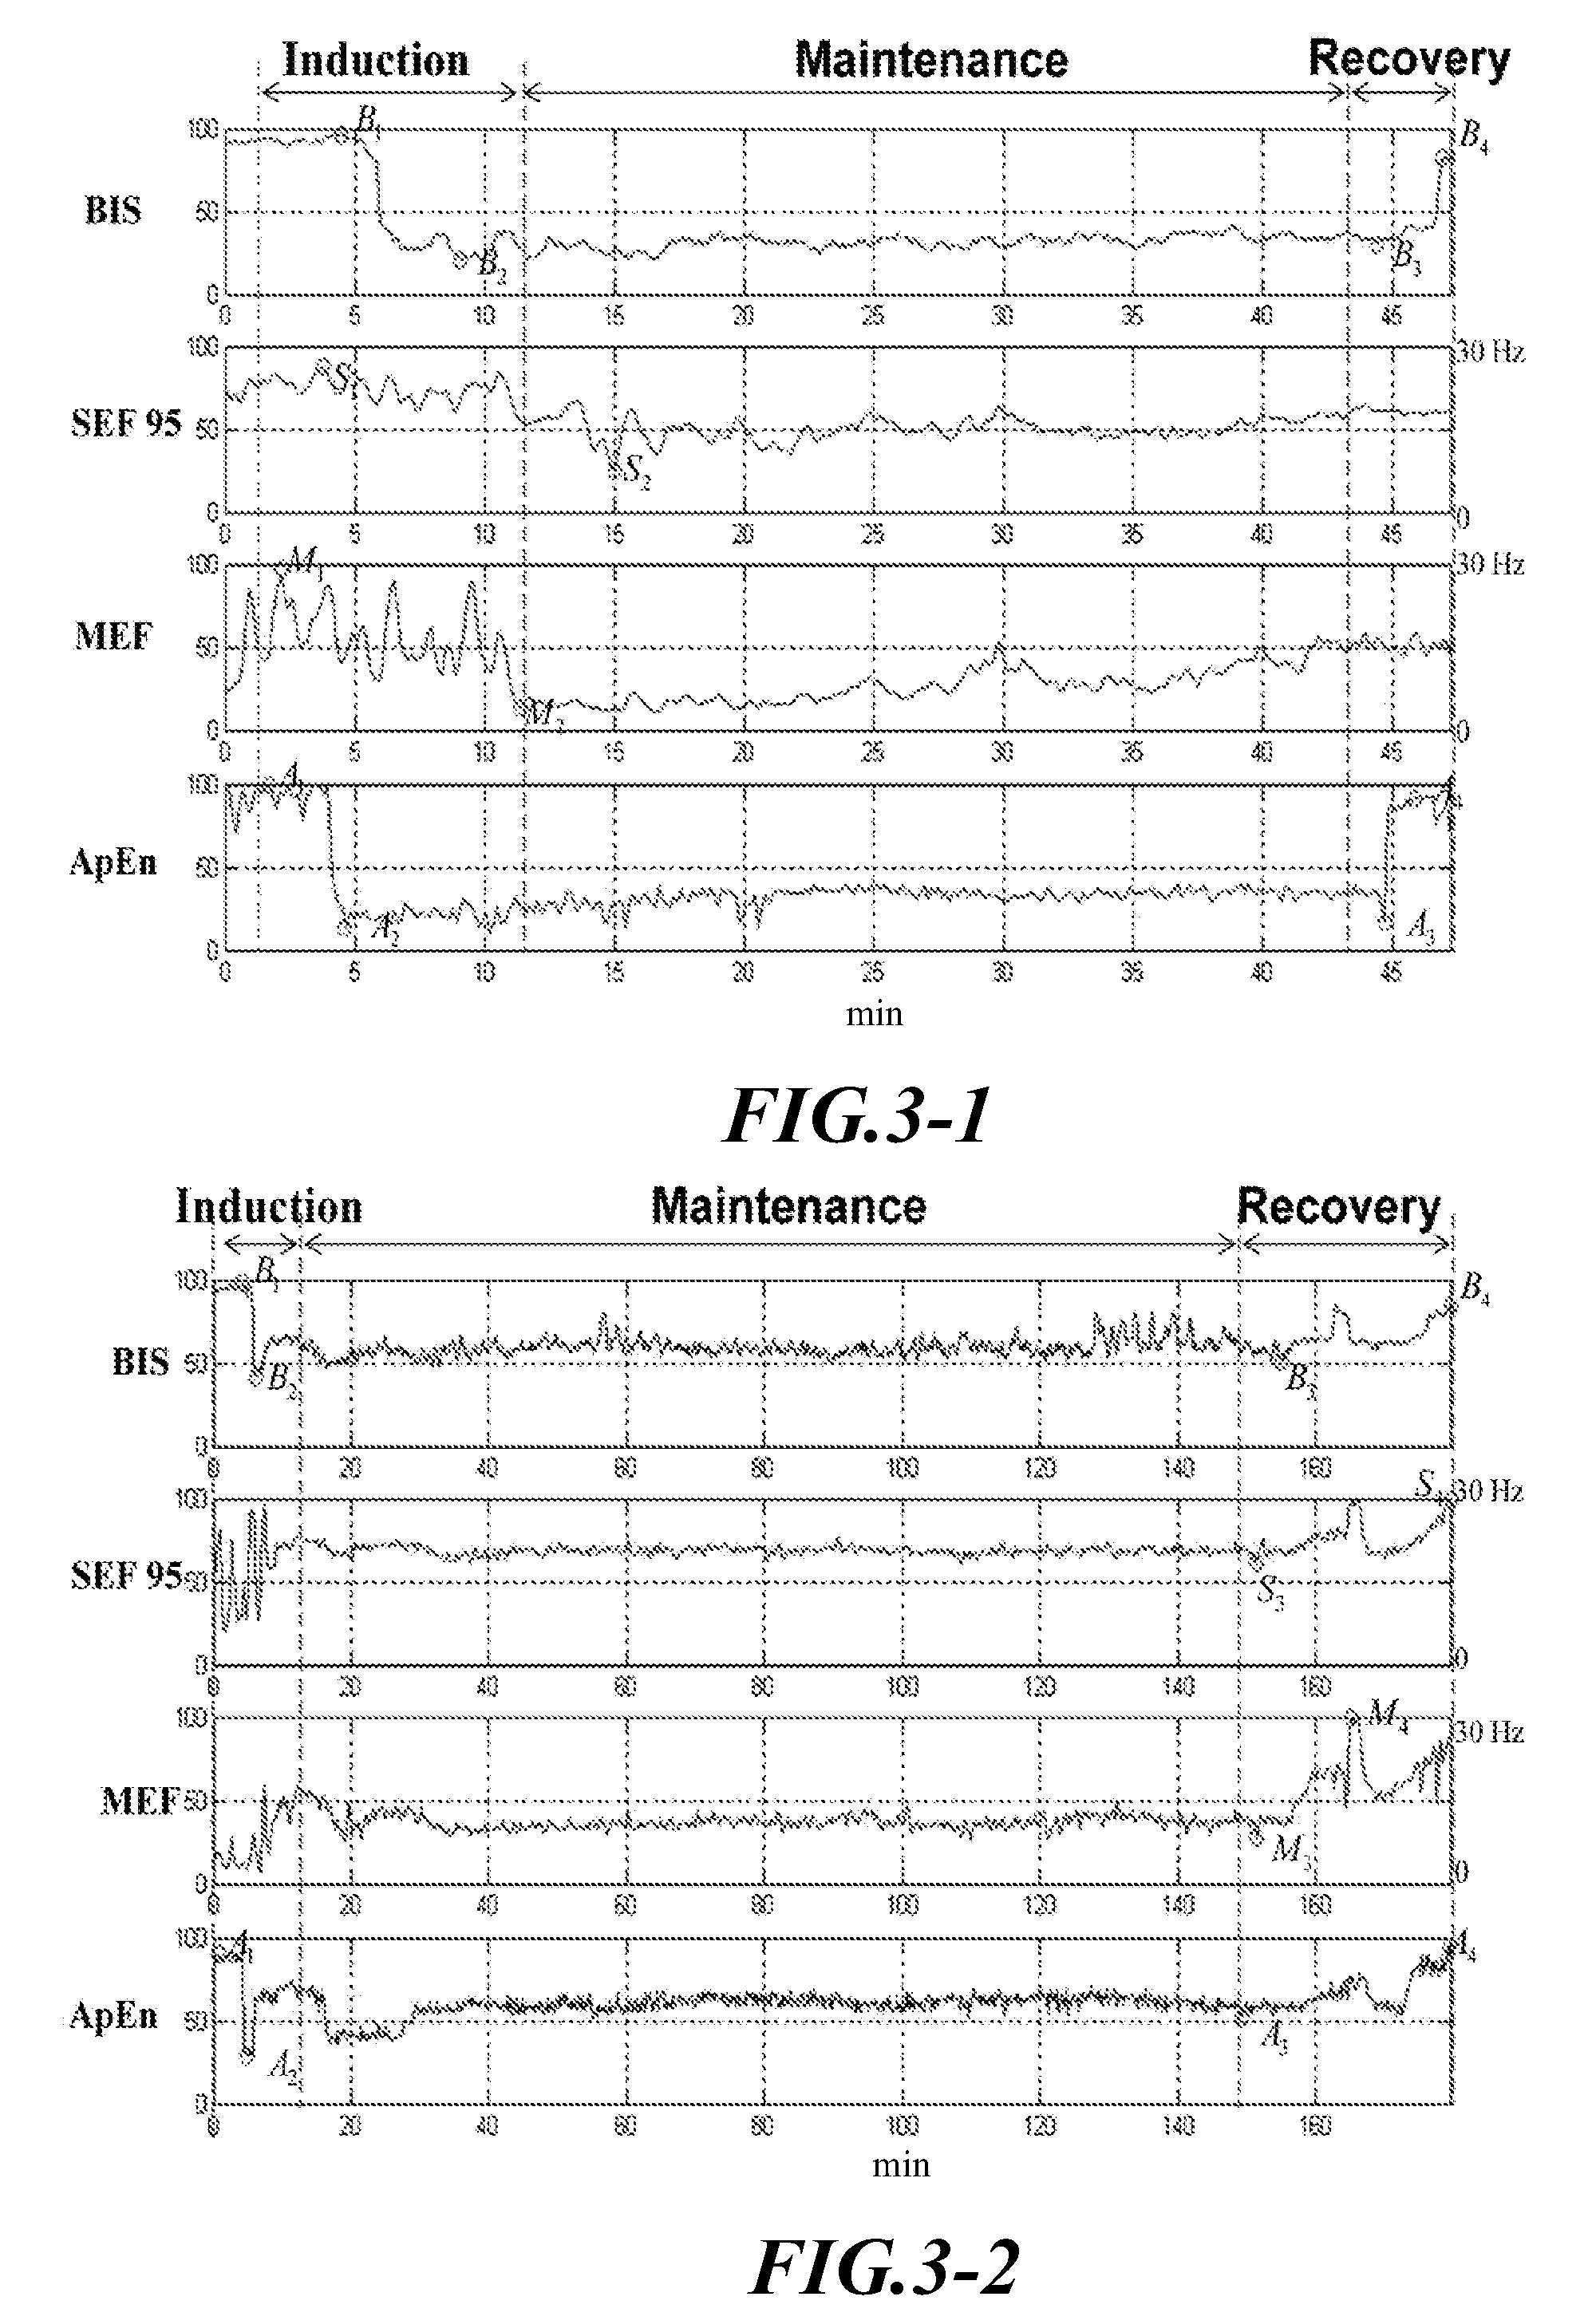 Method for Monitoring the Depth of Anesthesia